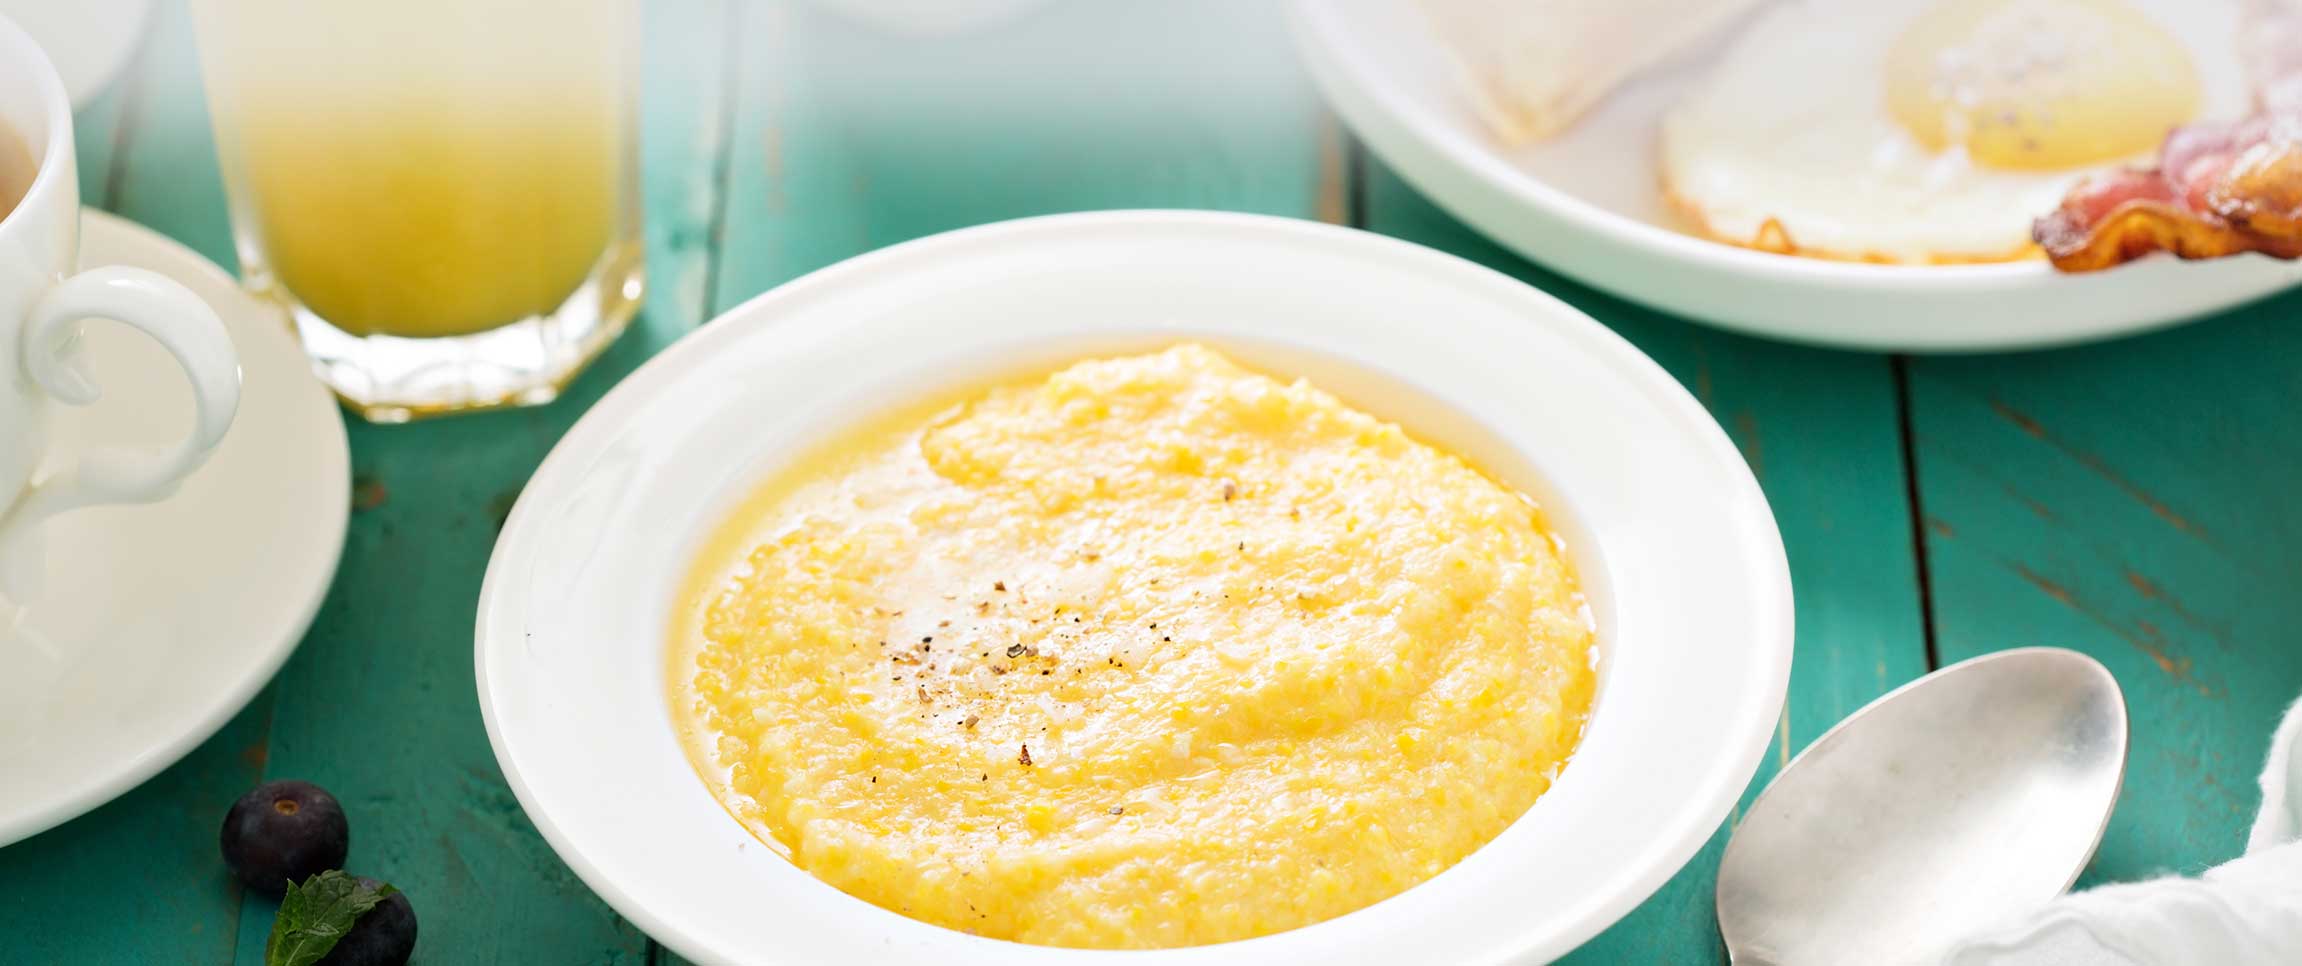 Cheesy grits with butter in a white bowl for breakfast